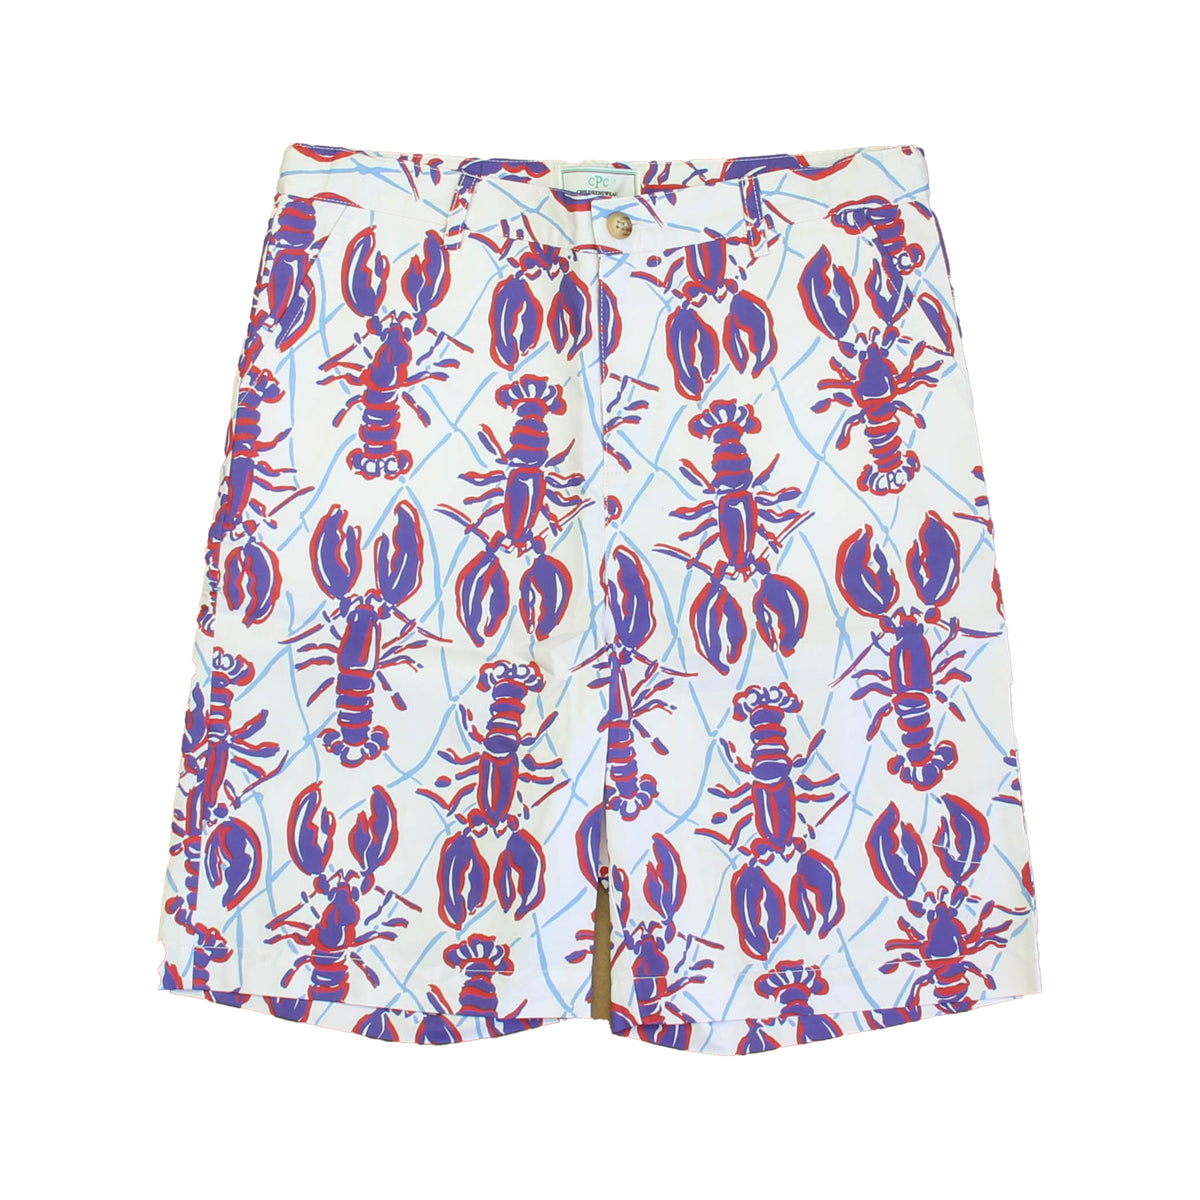 New with Tags: White | Red | Blue Lobster Shorts size: 6-14 Years -- FINAL SALE